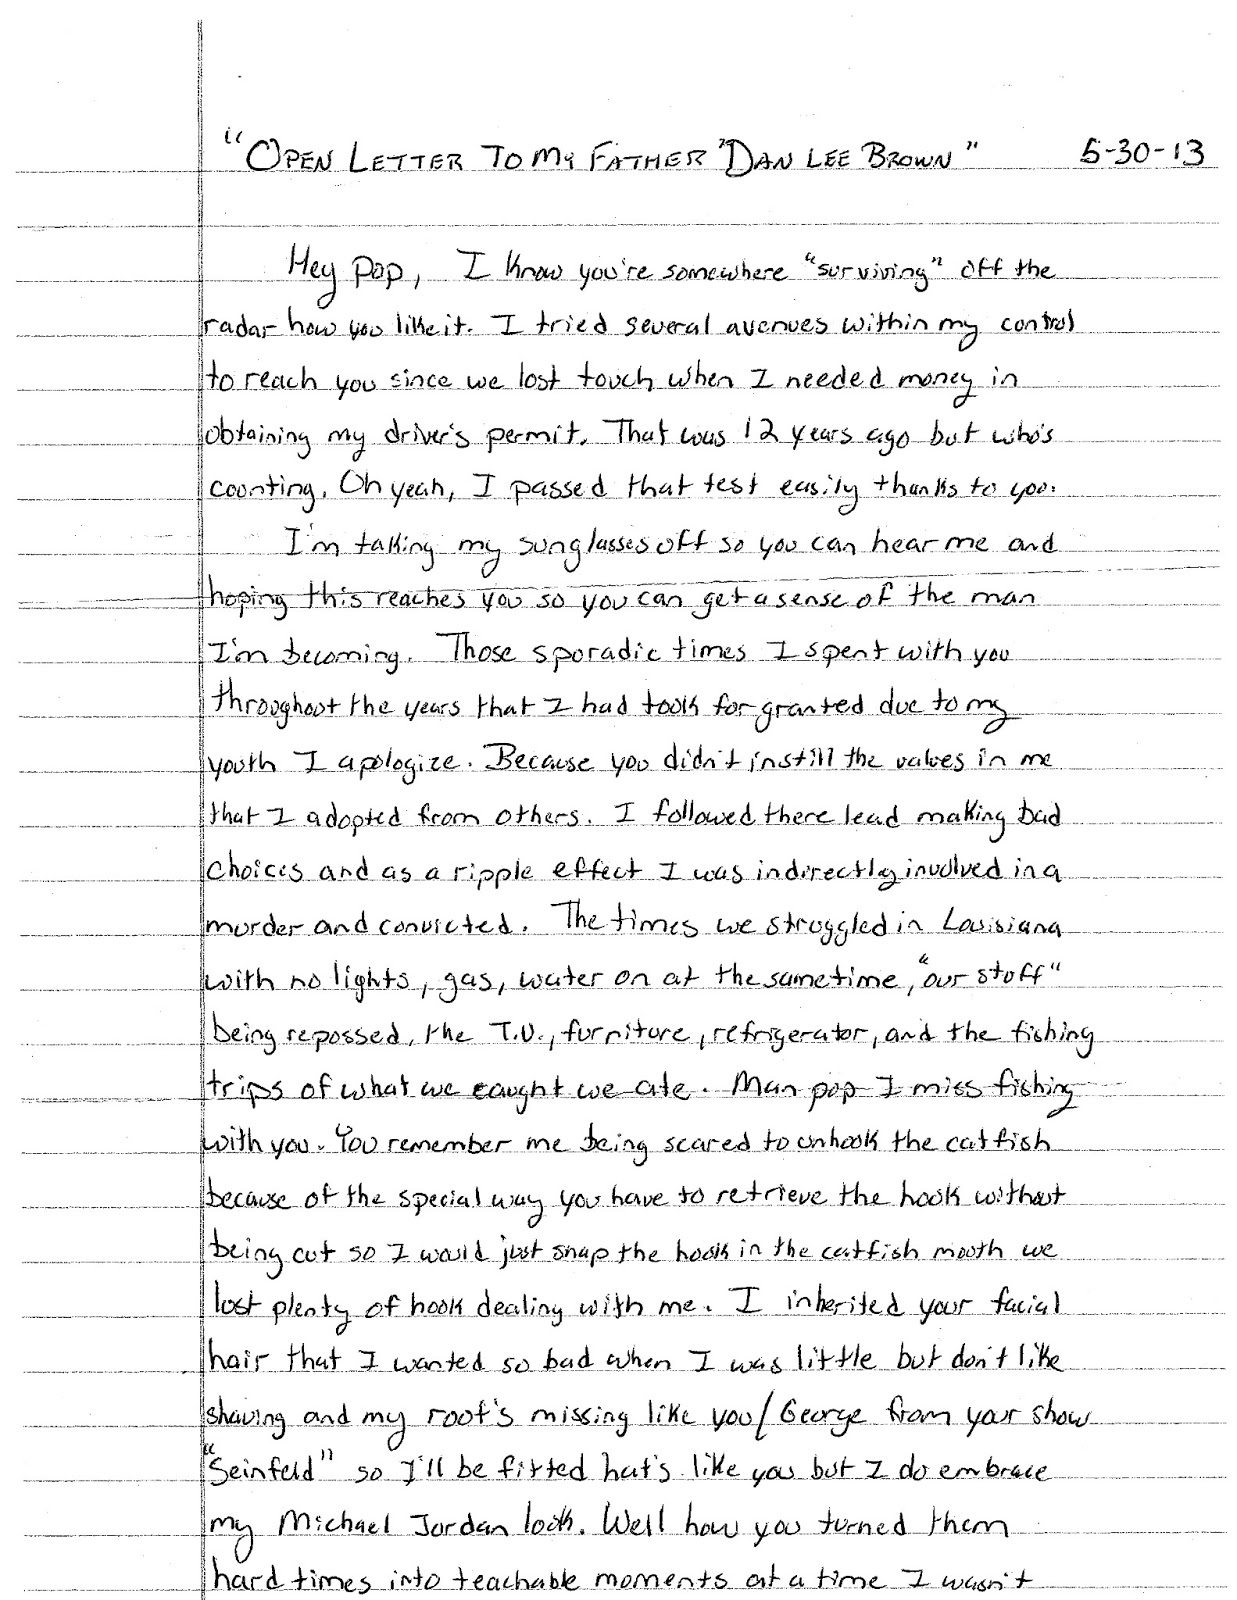 Friends of prisoners: Devin Brown, open letter to his father